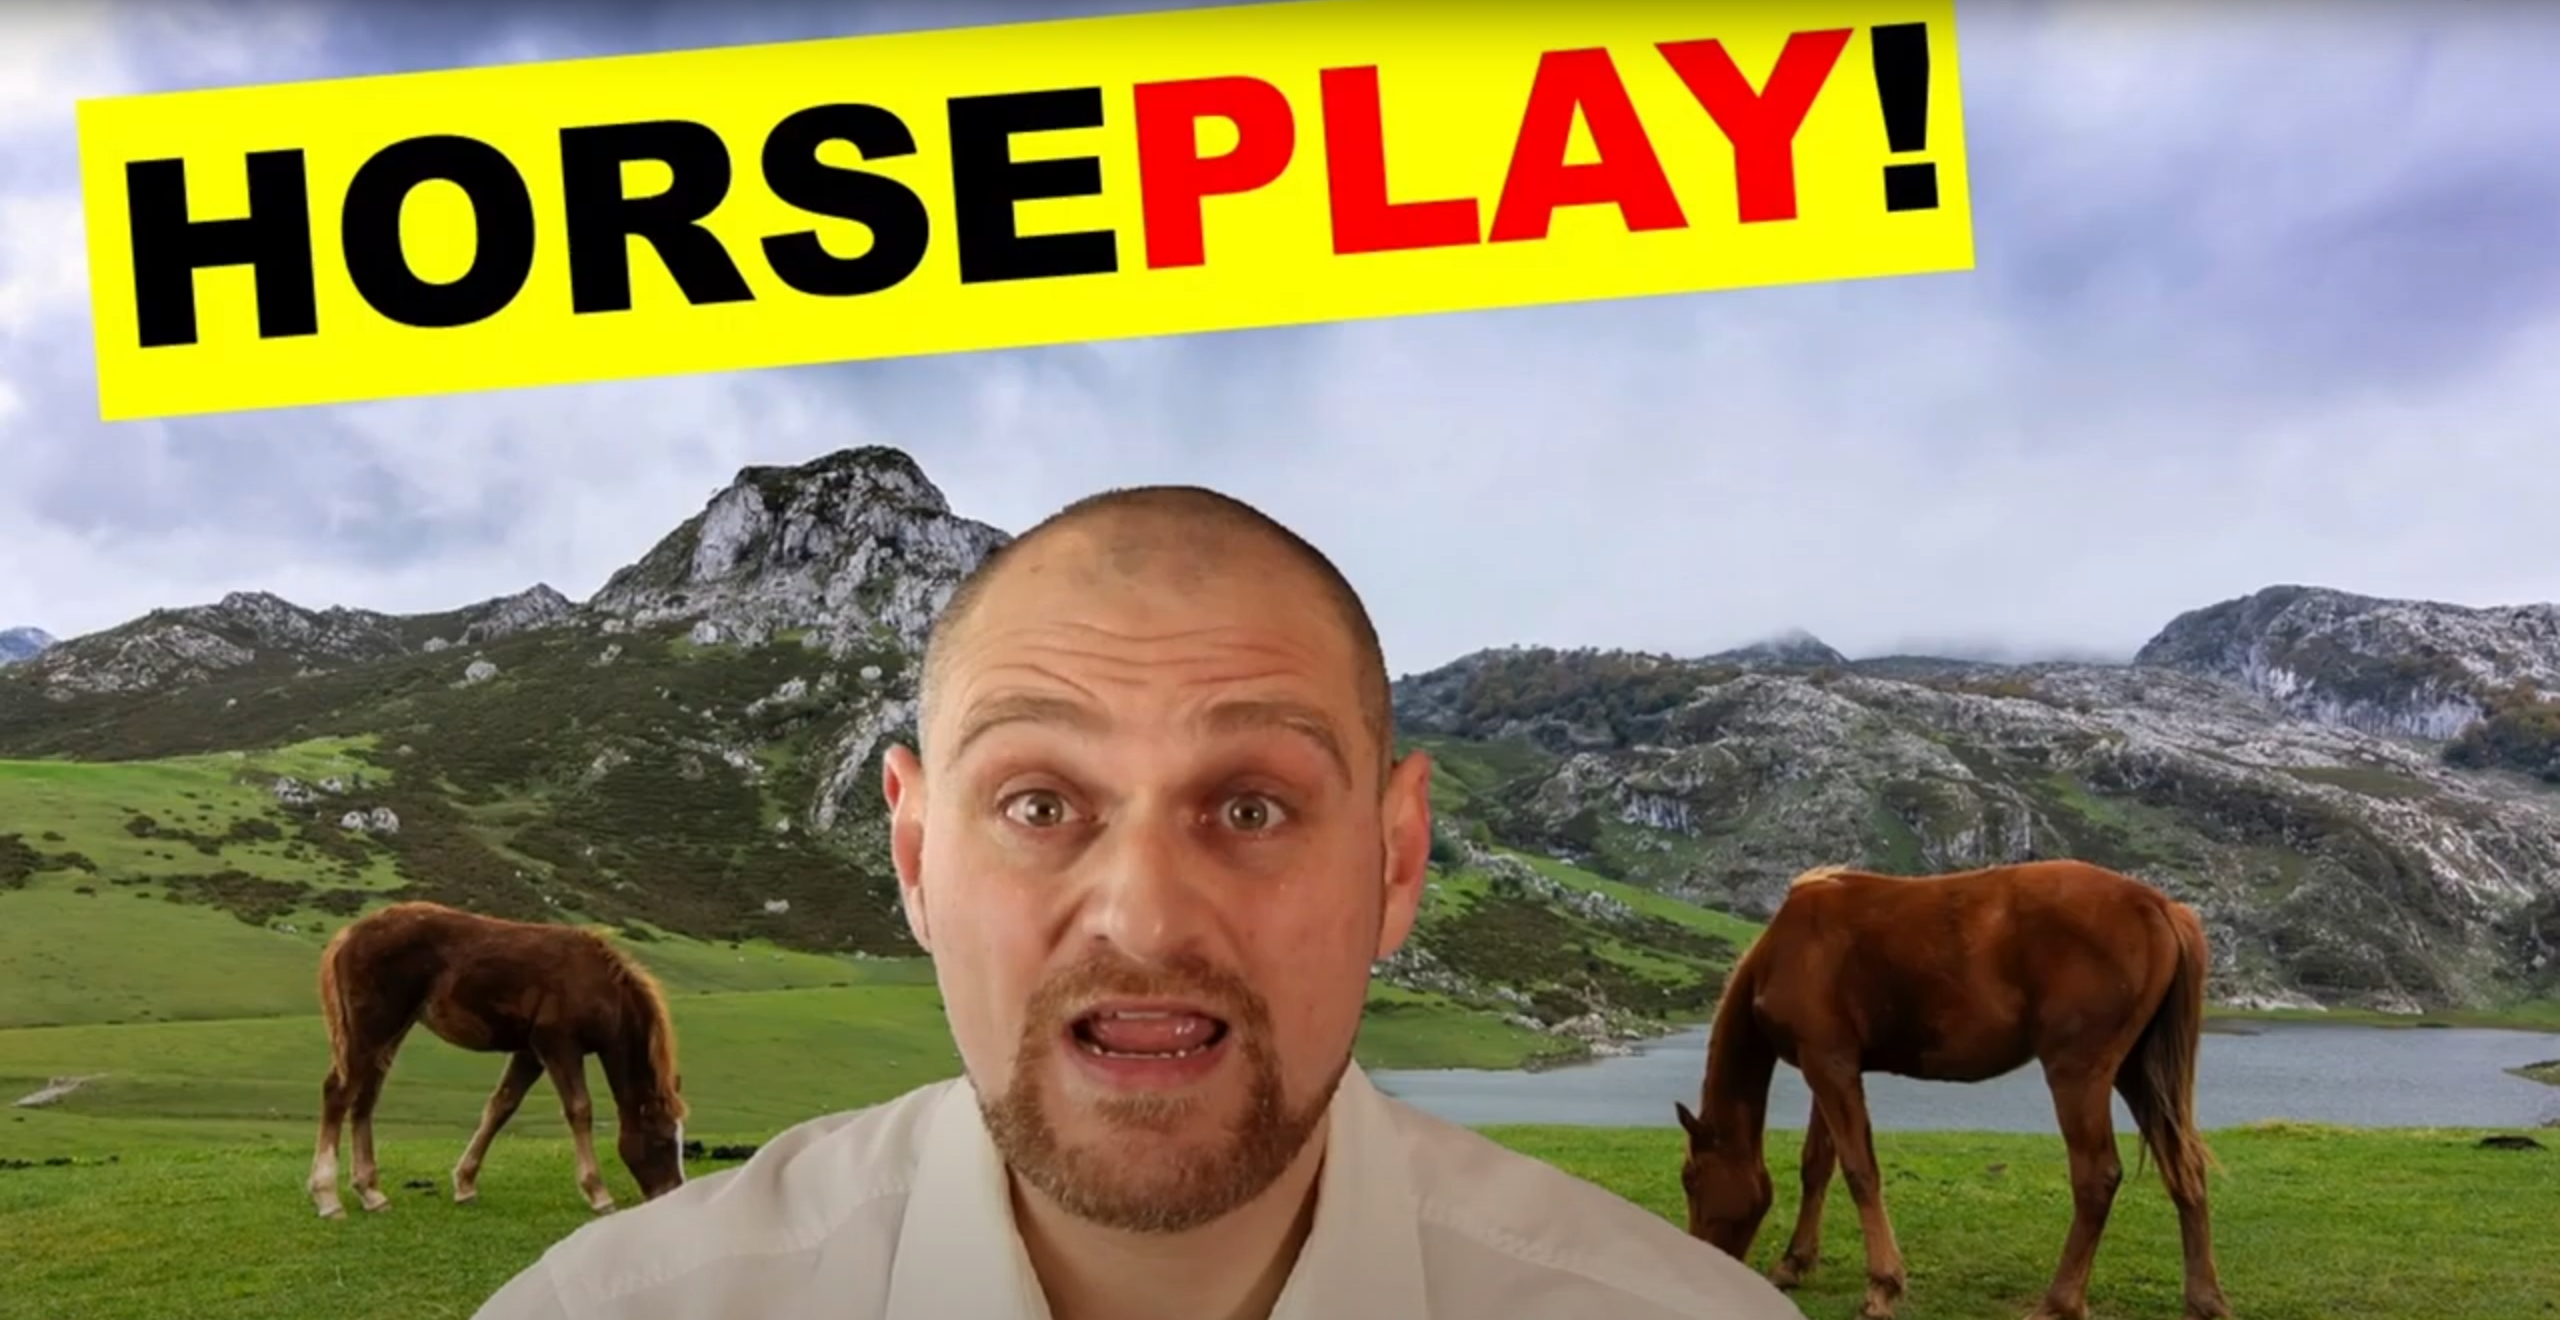 Horseplay! – Safety Moment